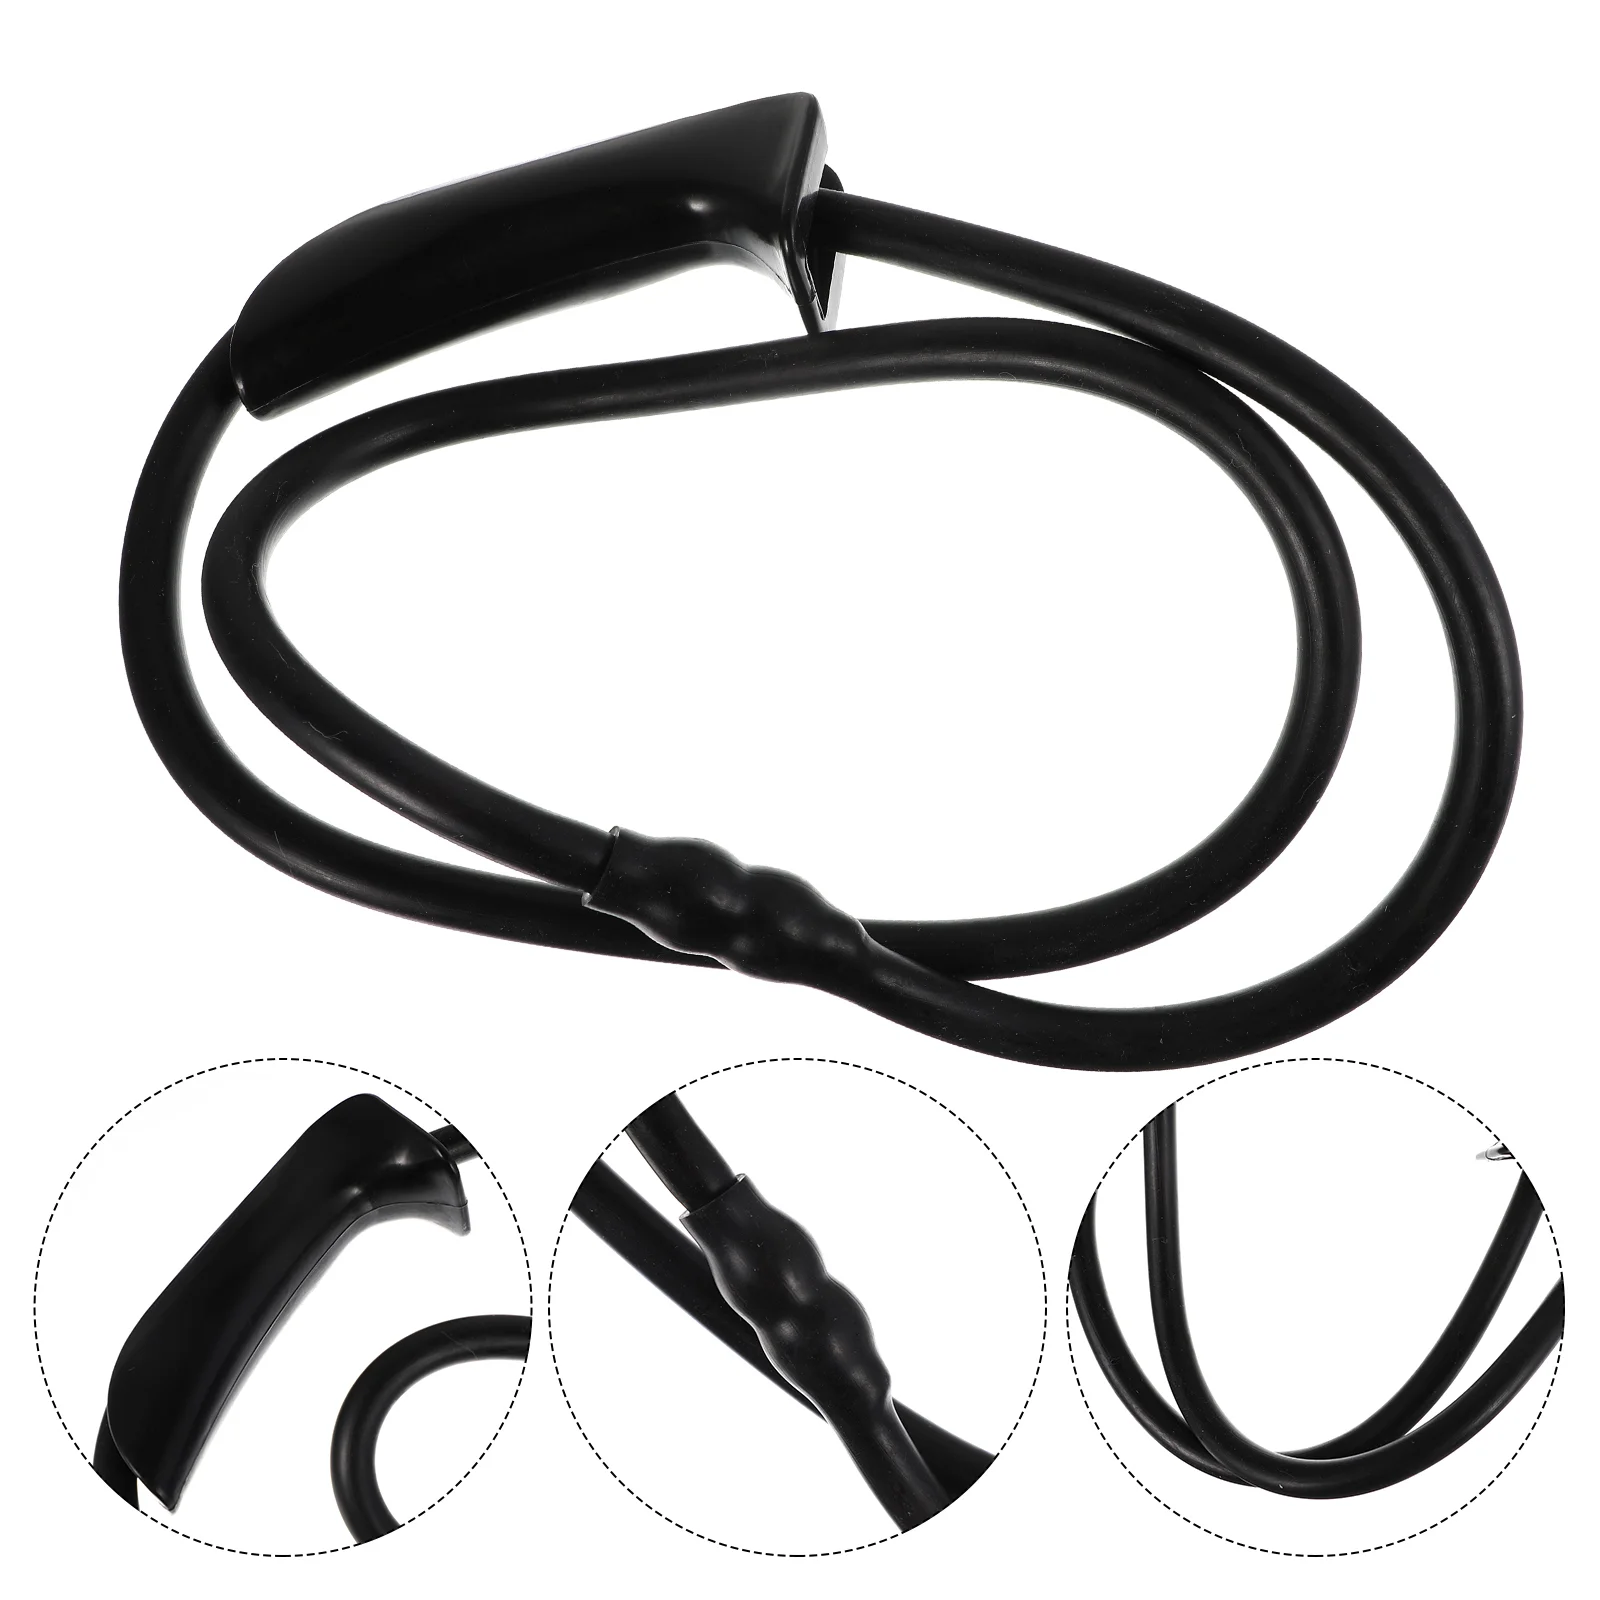 

Puller Archery Draw Training Aid Exercise Equipment Strength Rubber Finger Resistance Stretch Band Fitness Stretching